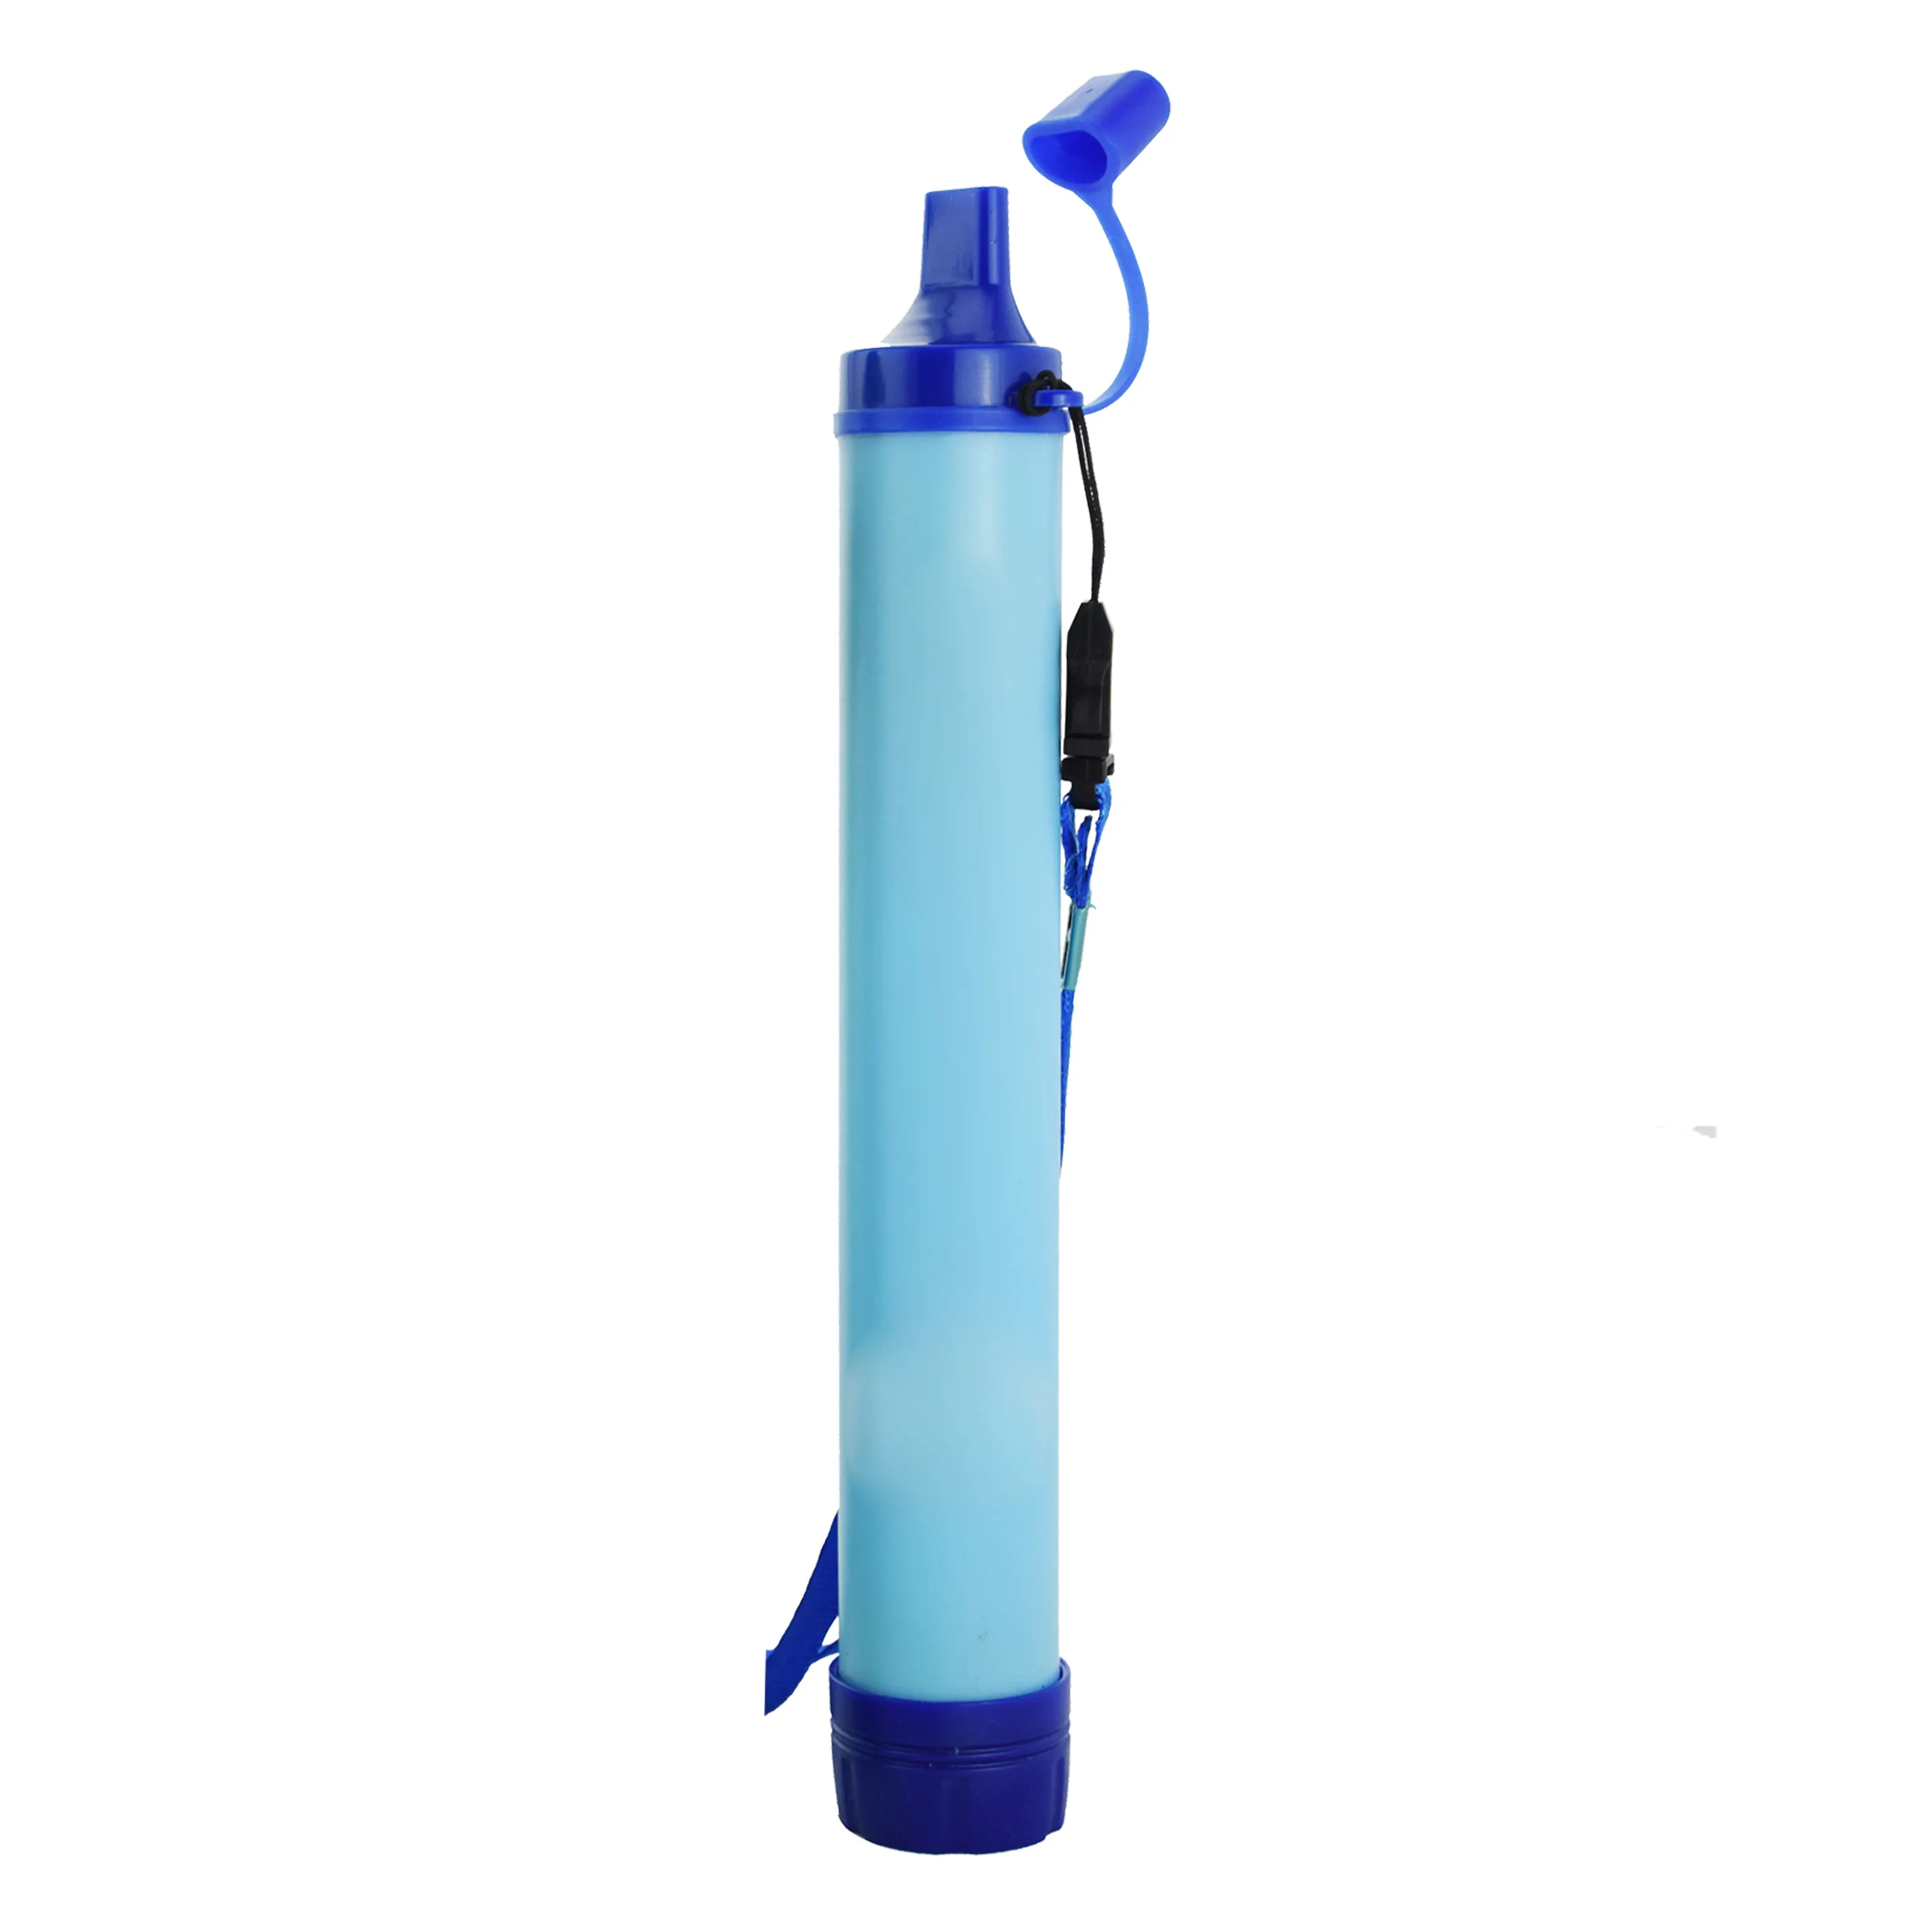 Personal Water Filter straw-Water Straws - Portable Water Filters for Camping, Hiking or Survival.